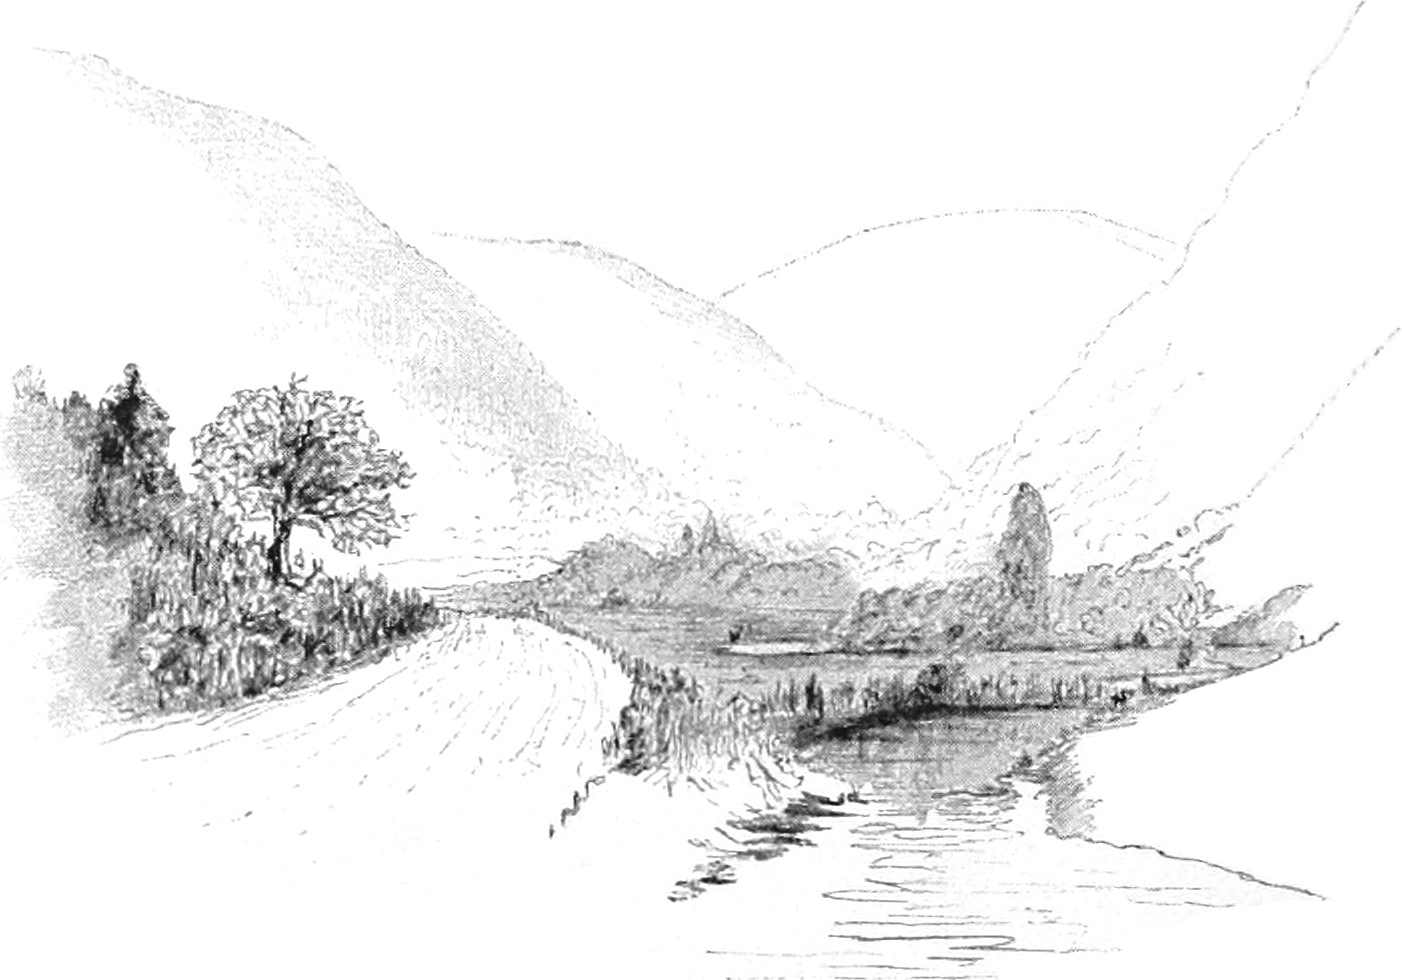 Sketch of winding stream in a mountain valley, with a road and trees to the left and mountains straight ahead.